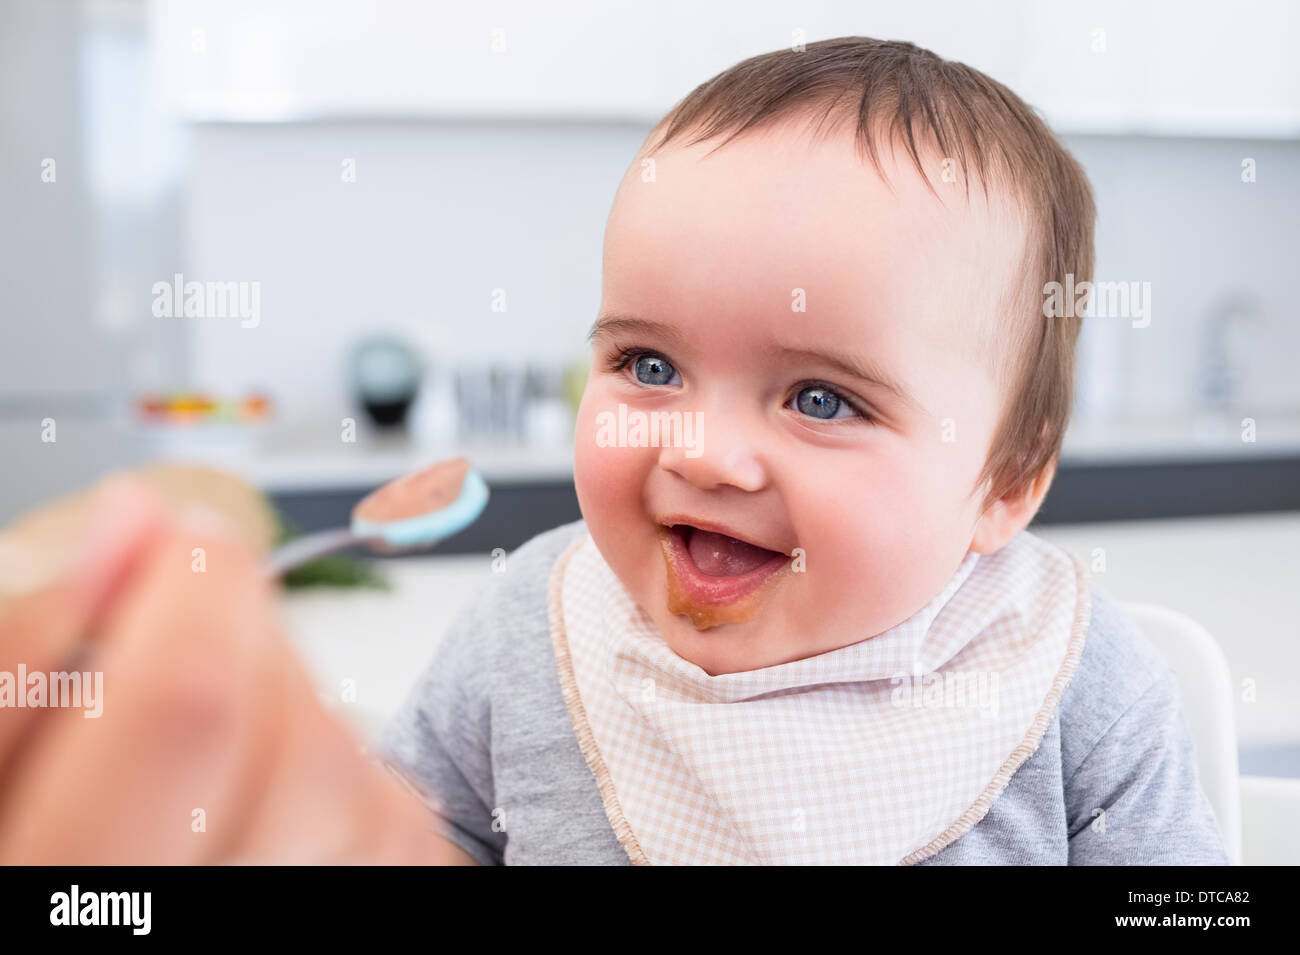 Baby boy being fed by mother Stock Photo